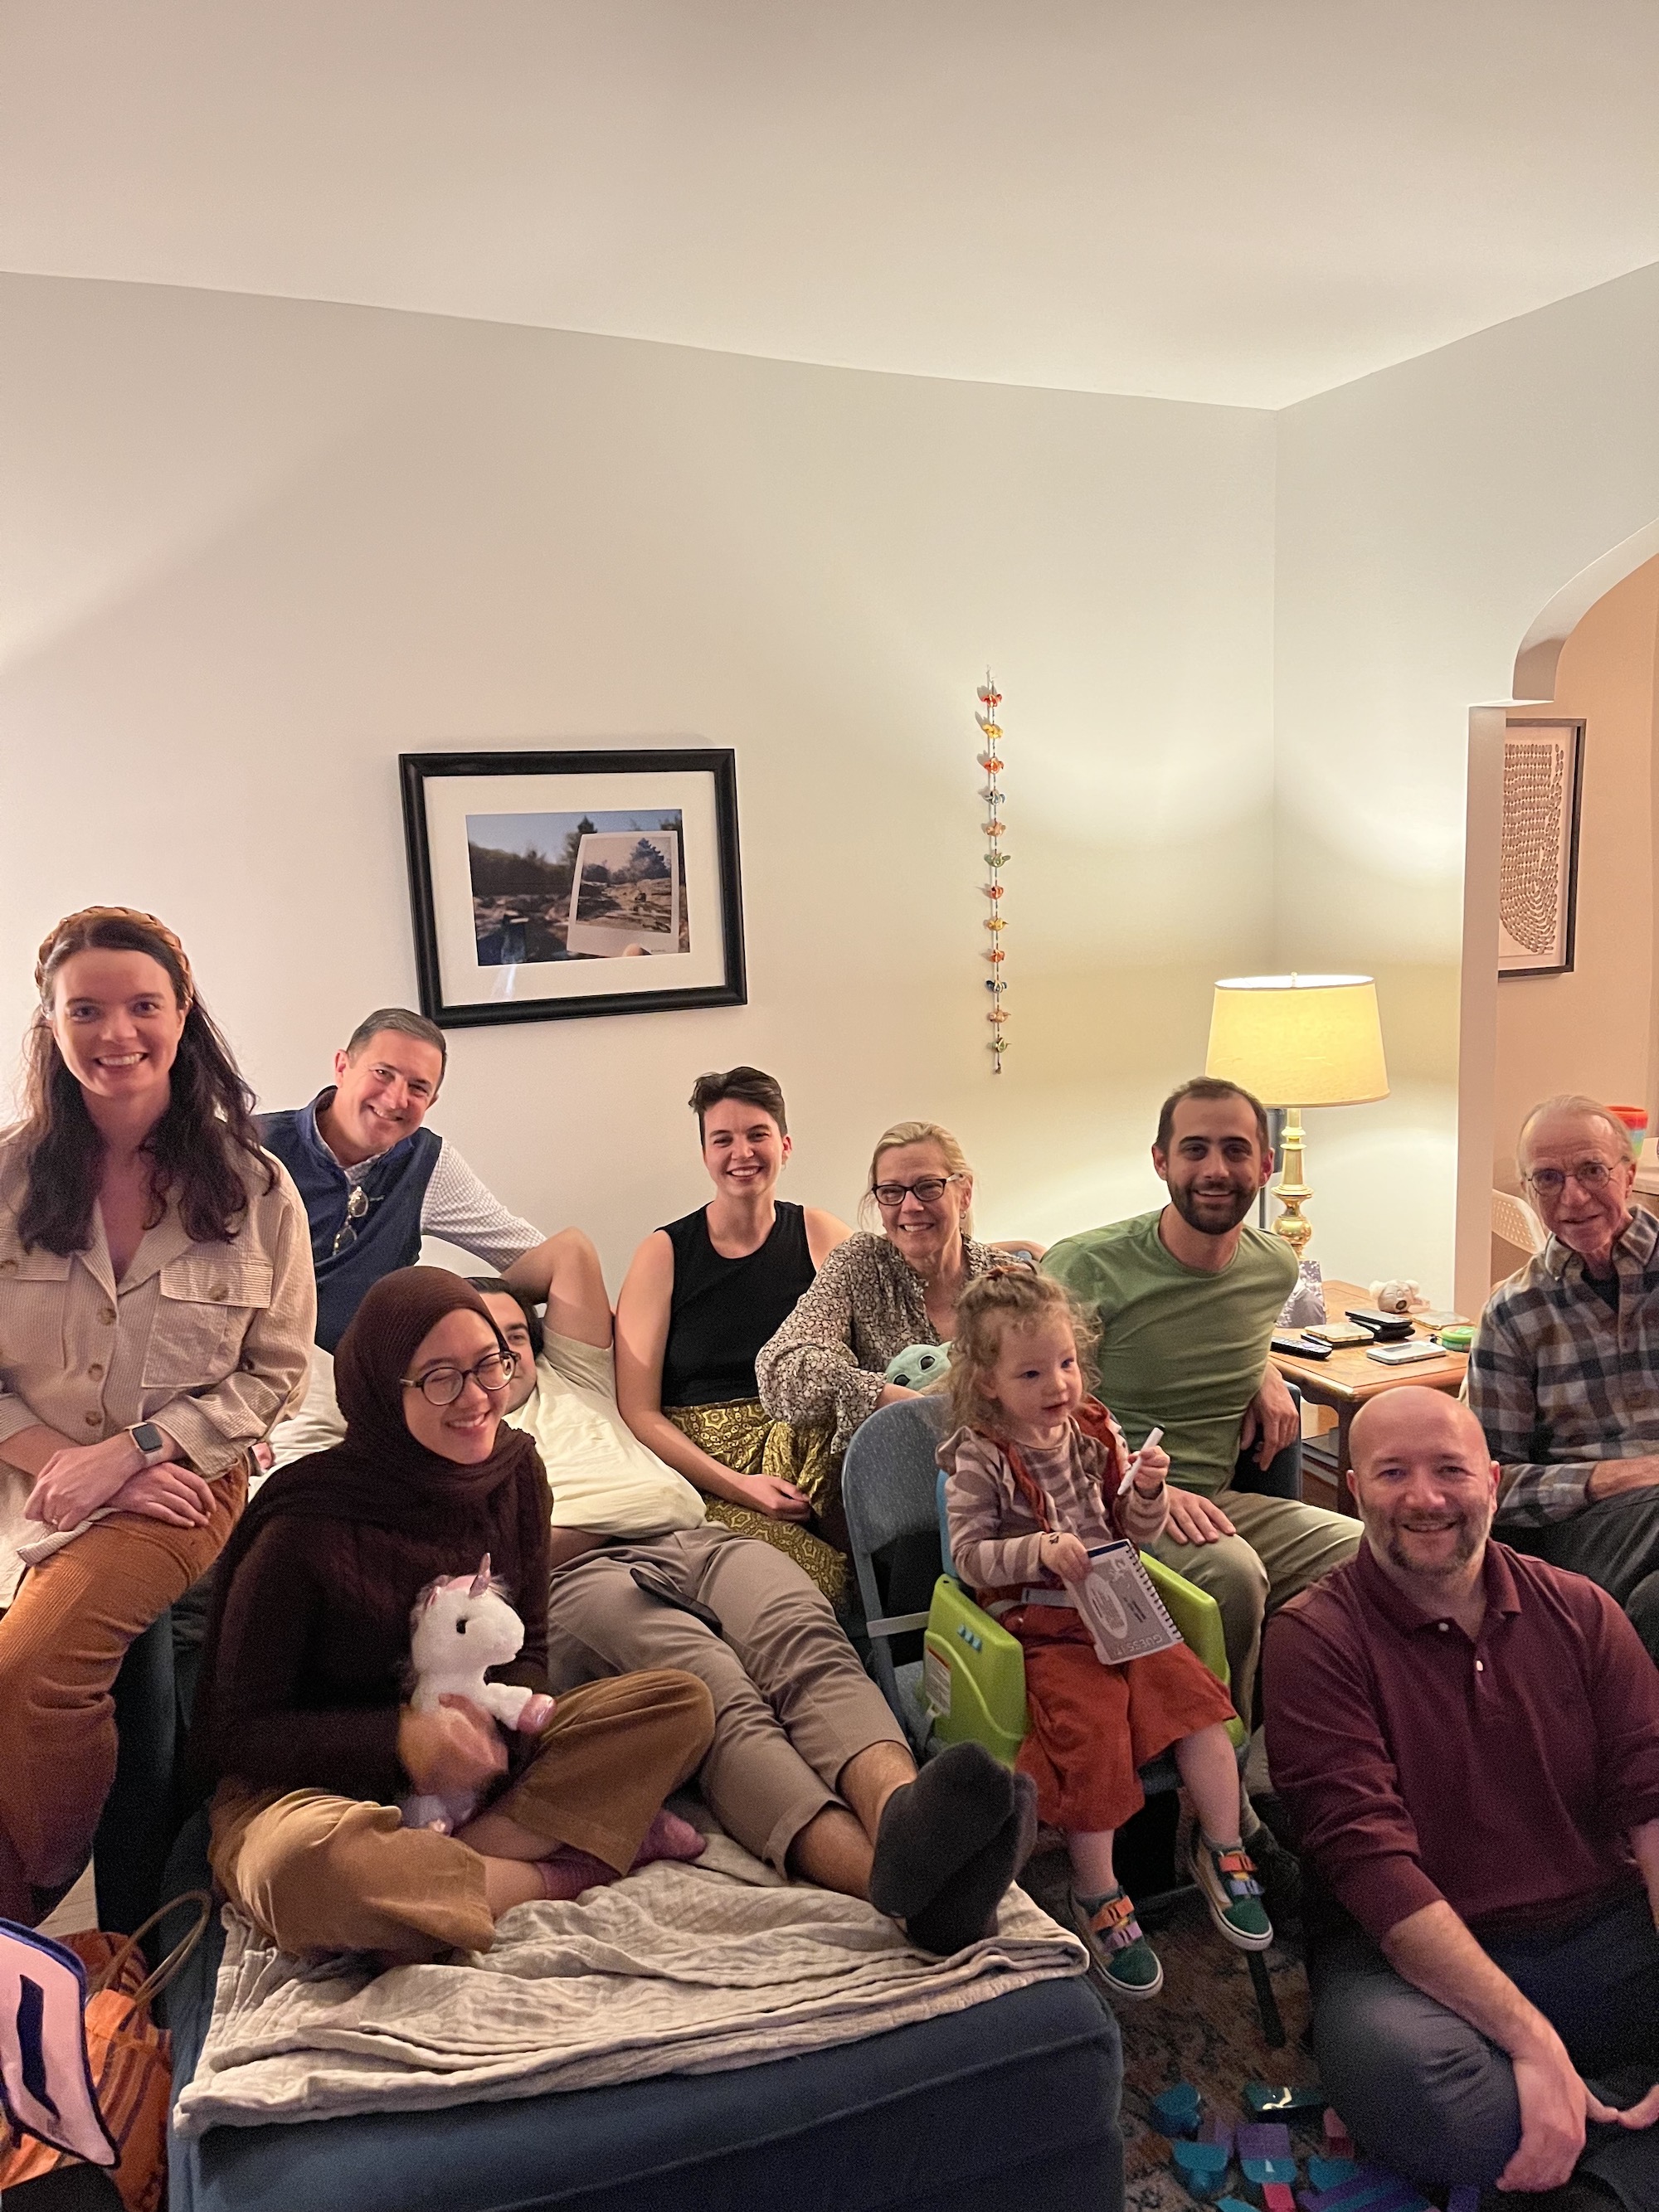 A group of people pose on a living room couch after Thanksgiving dinner.